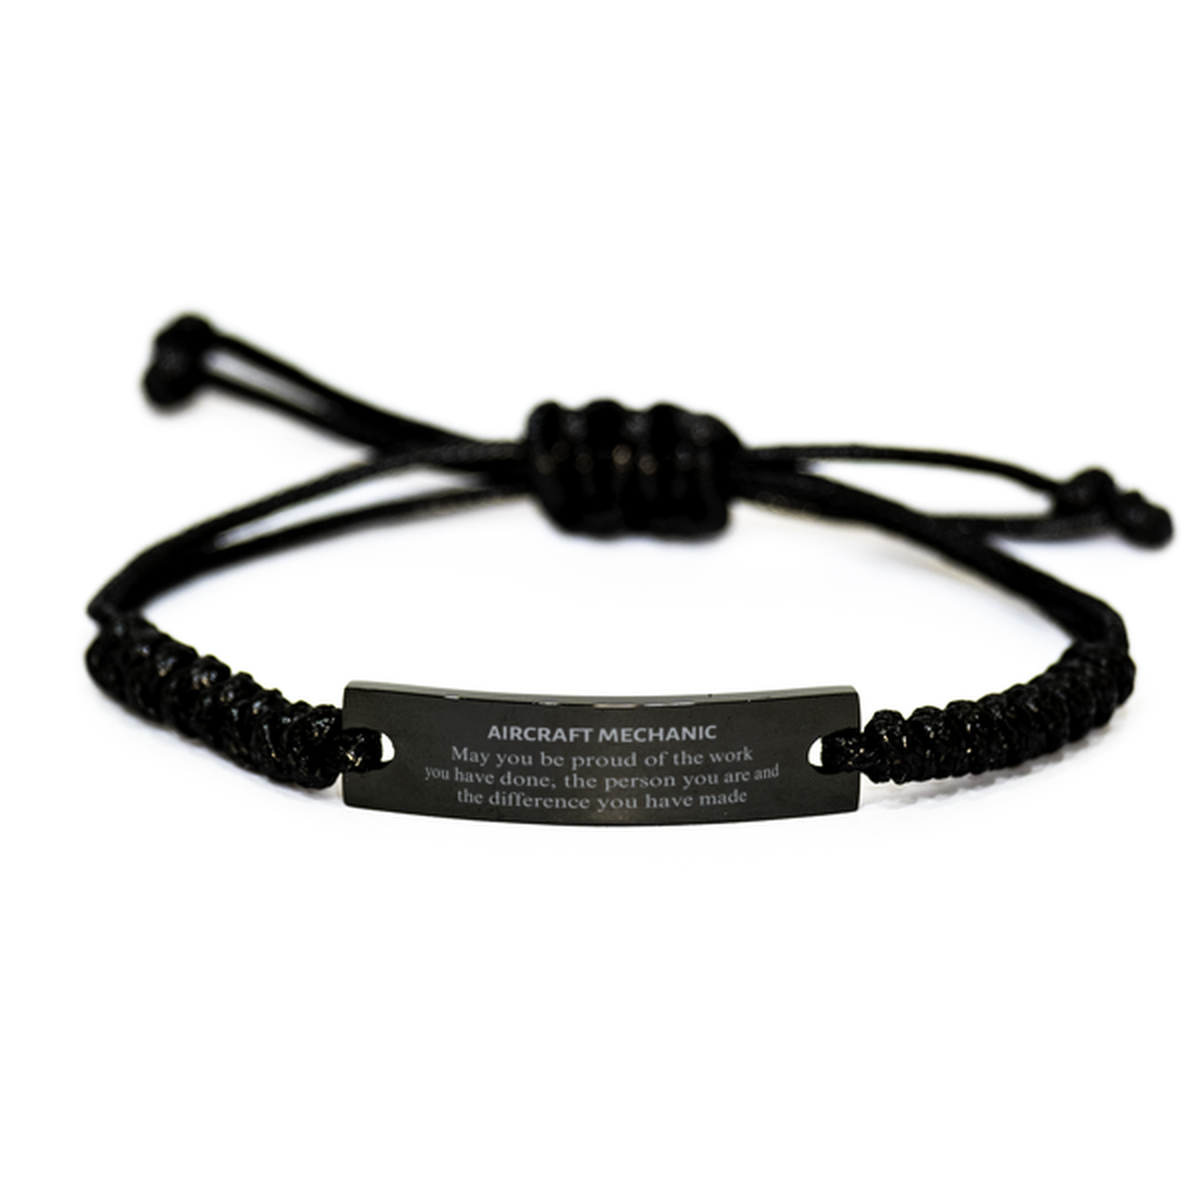 Aircraft Mechanic May you be proud of the work you have done, Retirement Aircraft Mechanic Black Rope Bracelet for Colleague Appreciation Gifts Amazing for Aircraft Mechanic